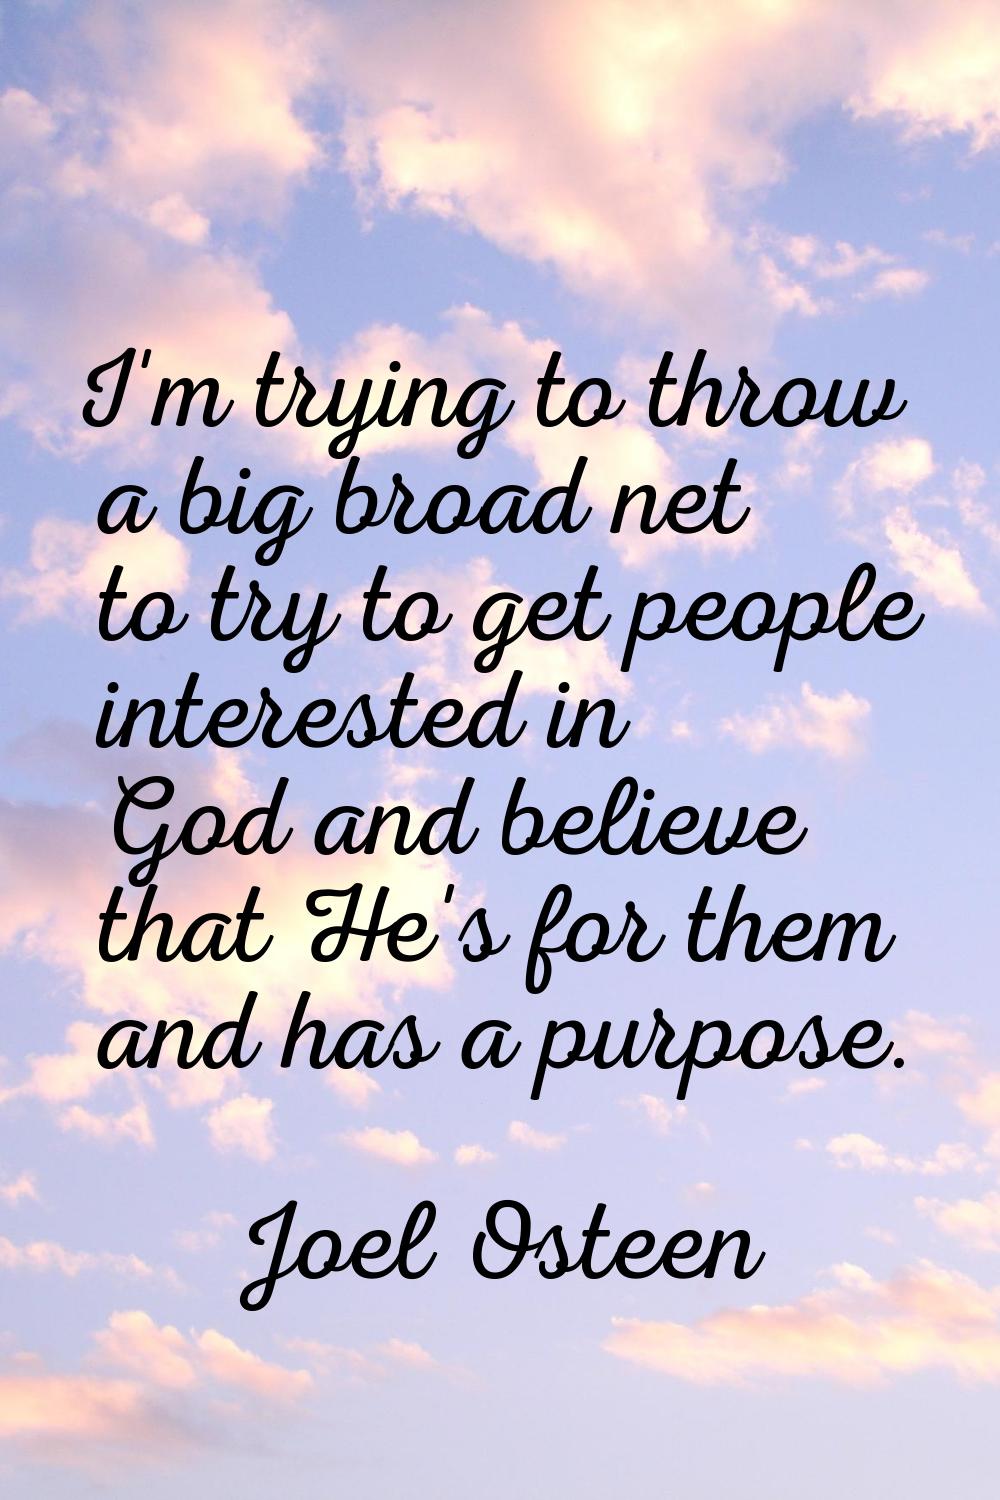 I'm trying to throw a big broad net to try to get people interested in God and believe that He's fo